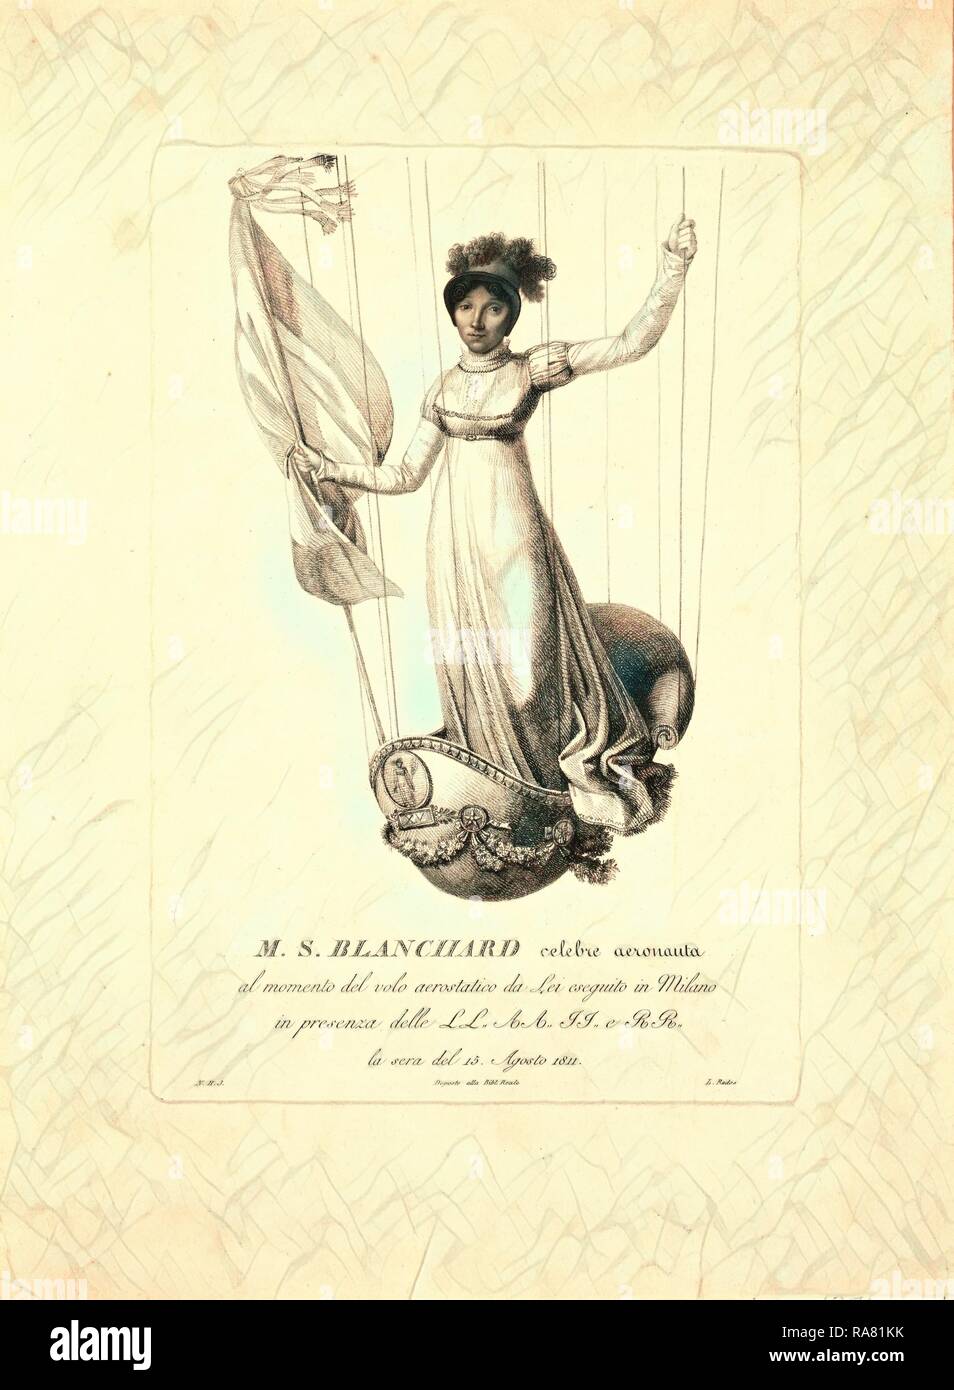 M.S. Blanchard, (Madeleine Sophie Armand) French aeronaut, 19th century engraving. Reimagined by Gibon. Classic art reimagined Stock Photo